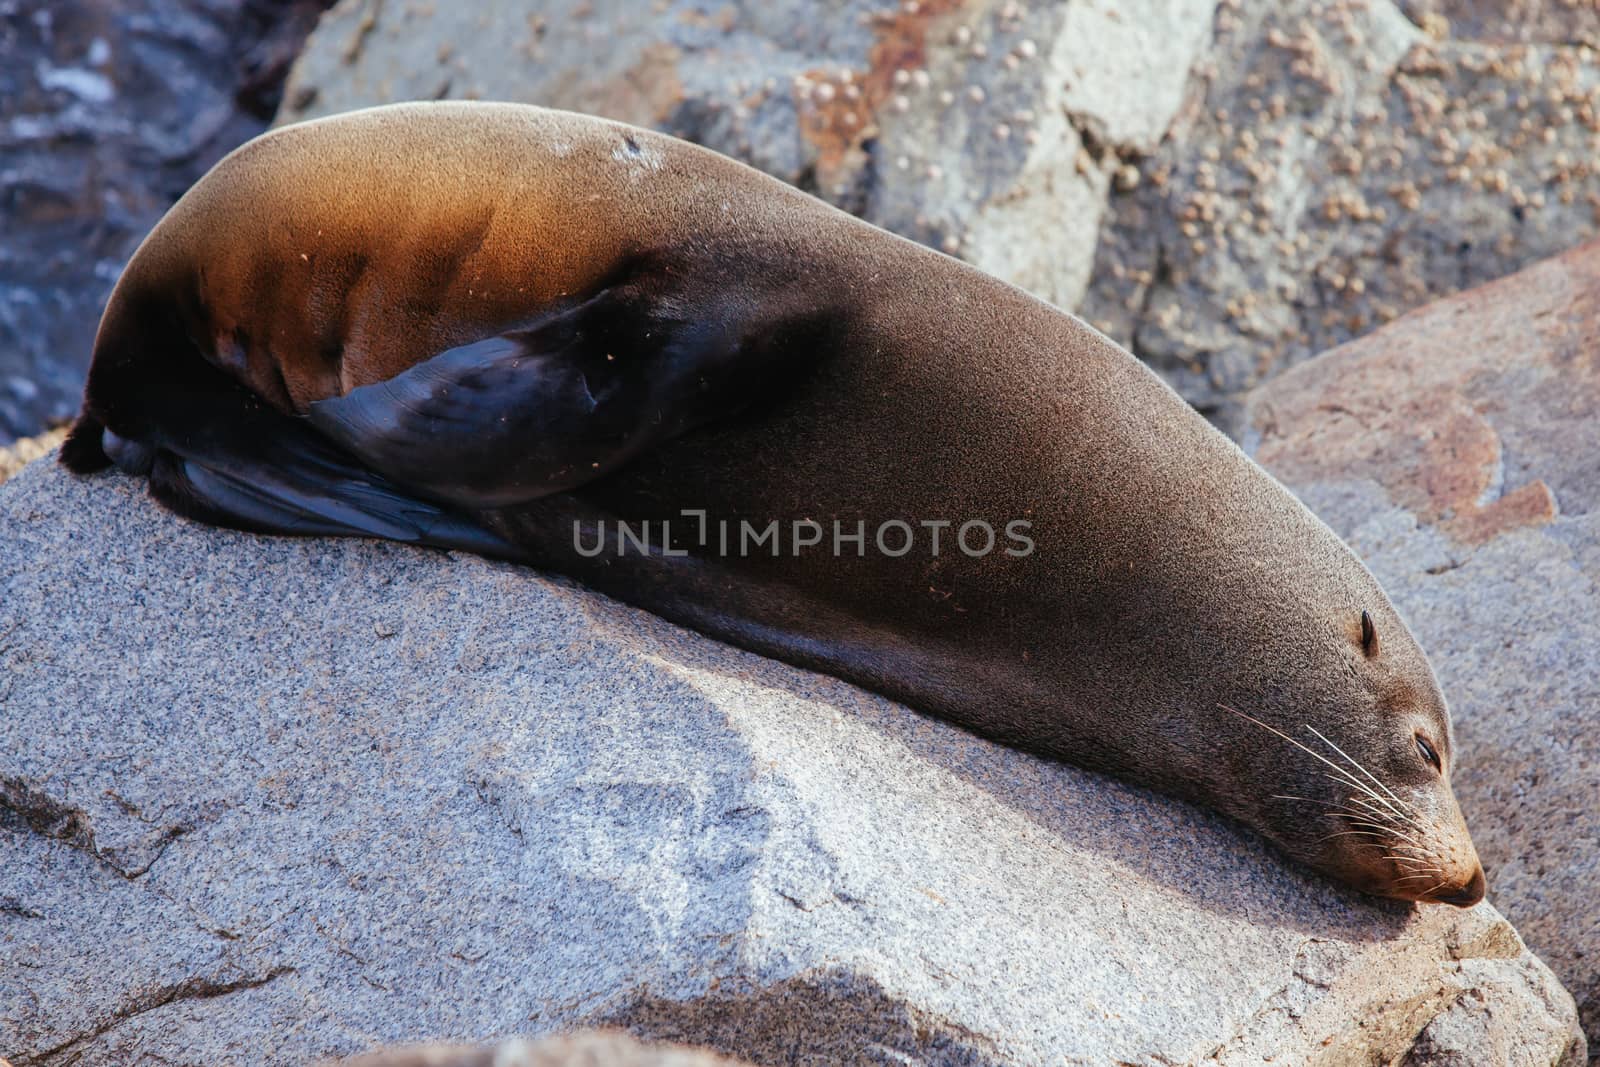 A seal basks in the sun in Narooma, New South Wales, Australia